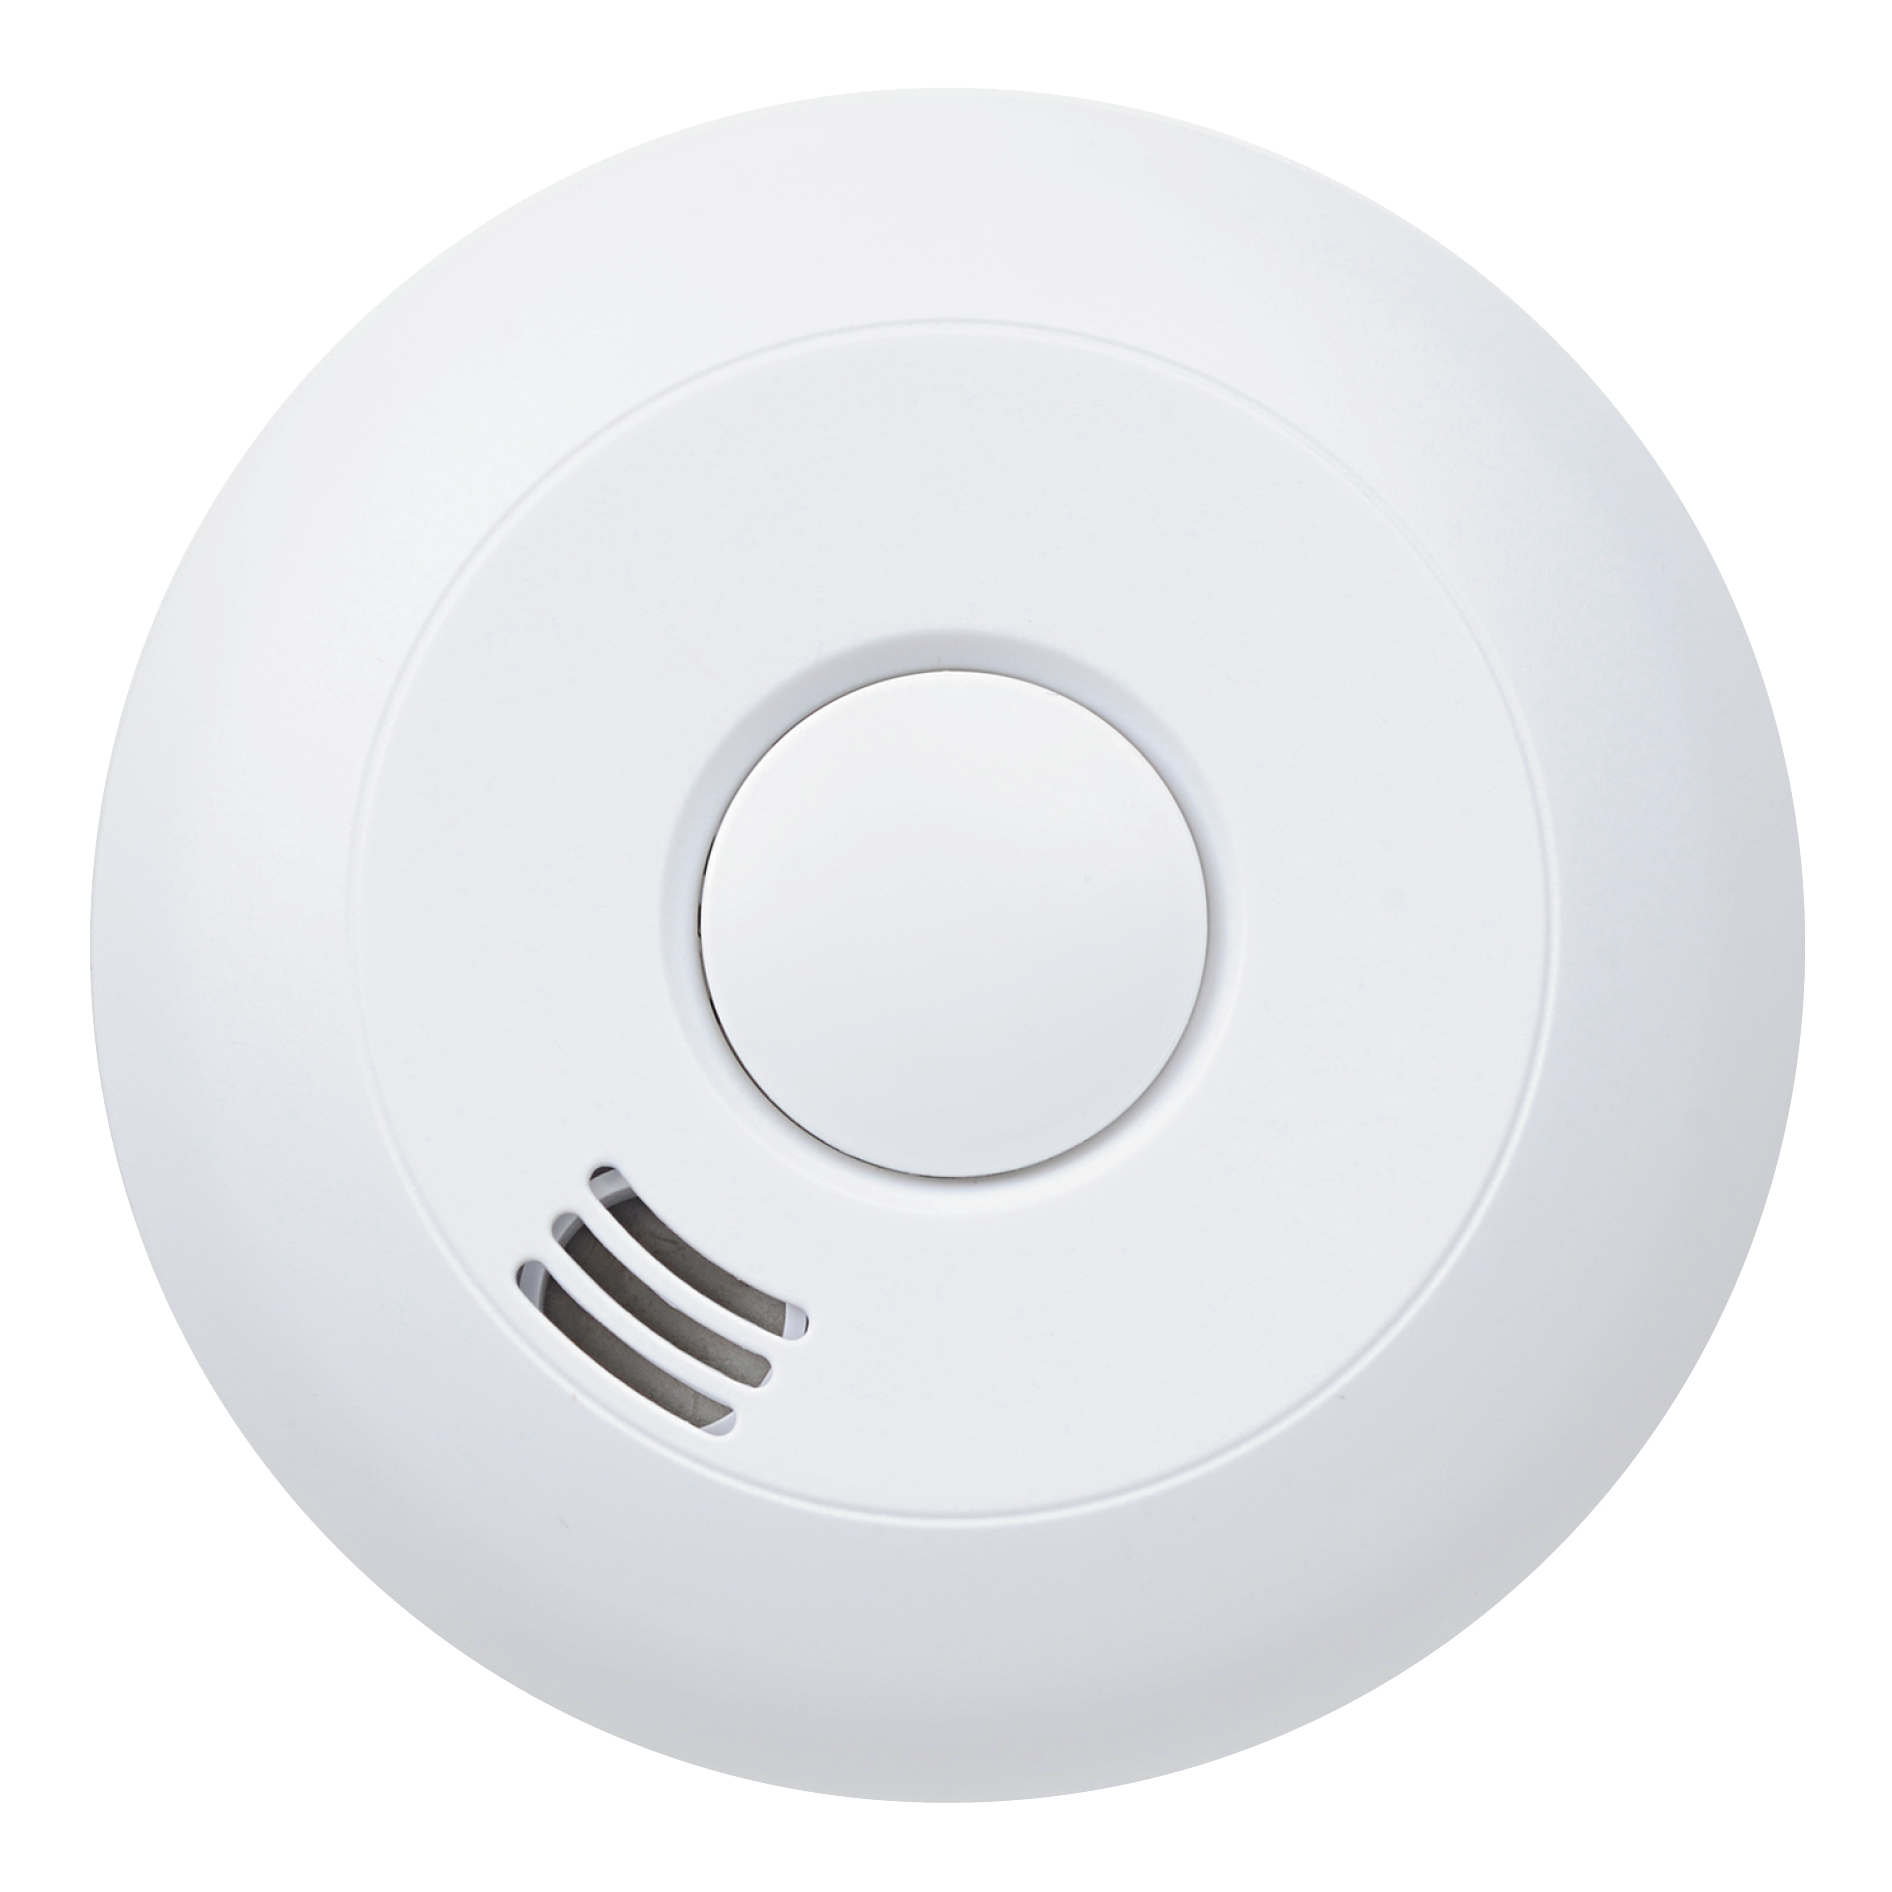 Nordic Quality optical smoke and heat alarm, connectable, 1 pcs.